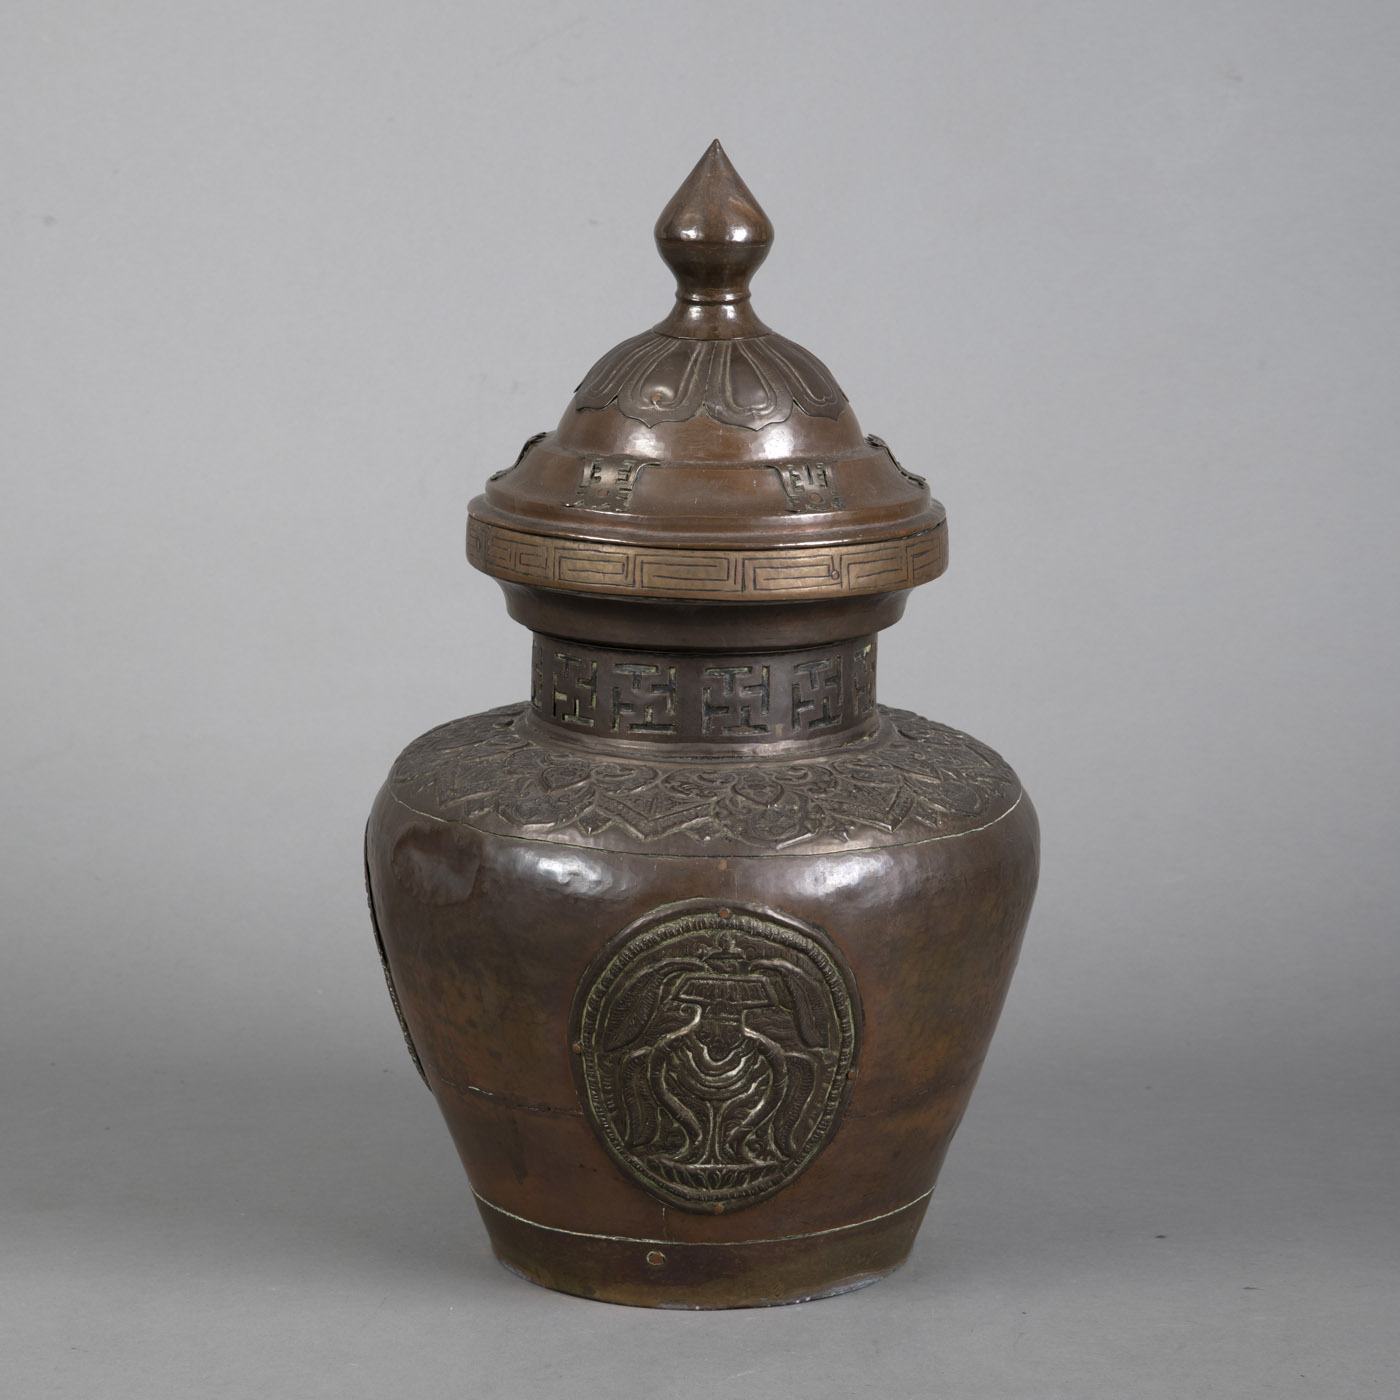 A LARGE EMBOSSED COPPER AND BRASS STORAGE VESSEL WITH SURROUNDING SWASTIKA AND "SHOU" CHARACTER DEC